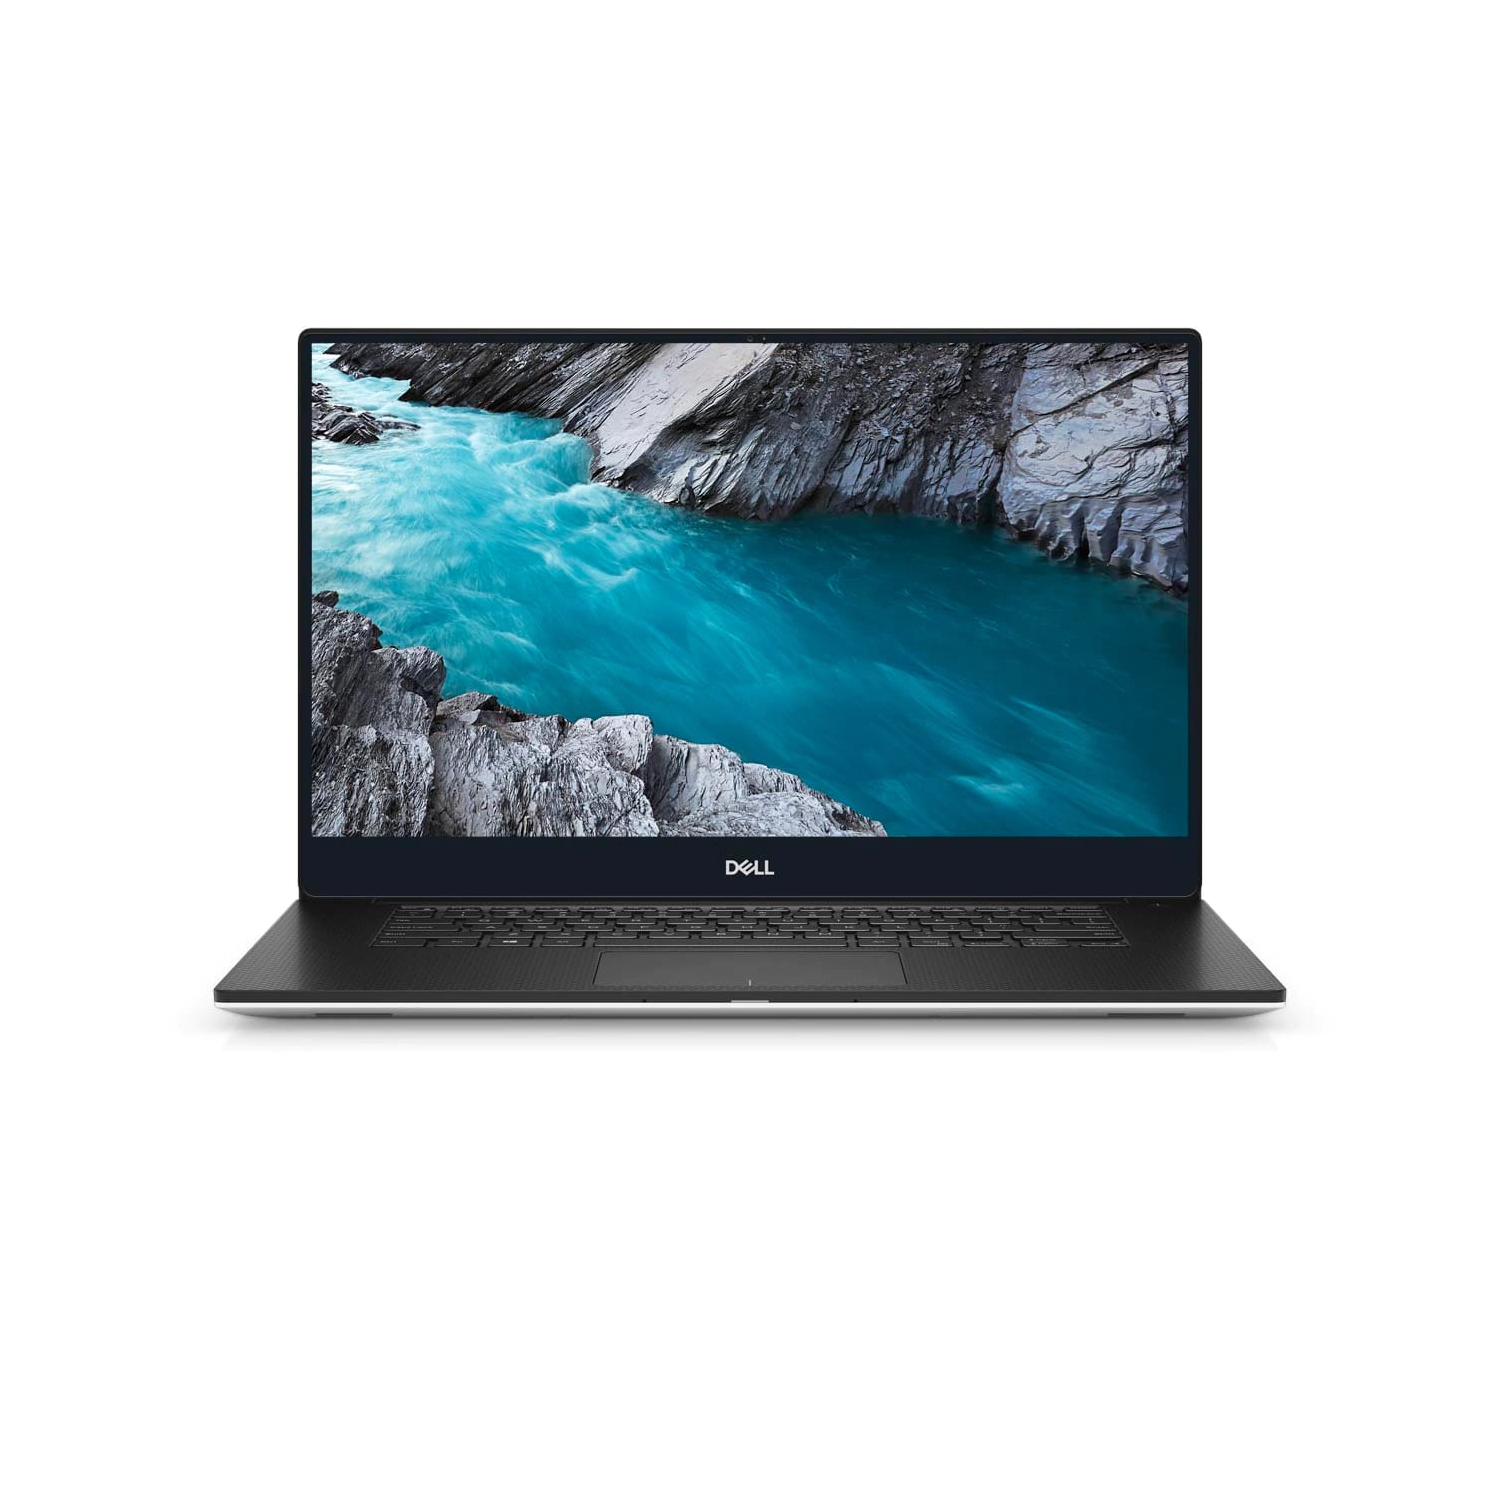 Refurbished (Excellent) - Dell XPS 15 7590 Laptop (2019) | 15.6" FHD | Core i7 - 512GB SSD - 16GB RAM - GTX 1650 | 6 Cores @ 4.5 GHz Certified Refurbished